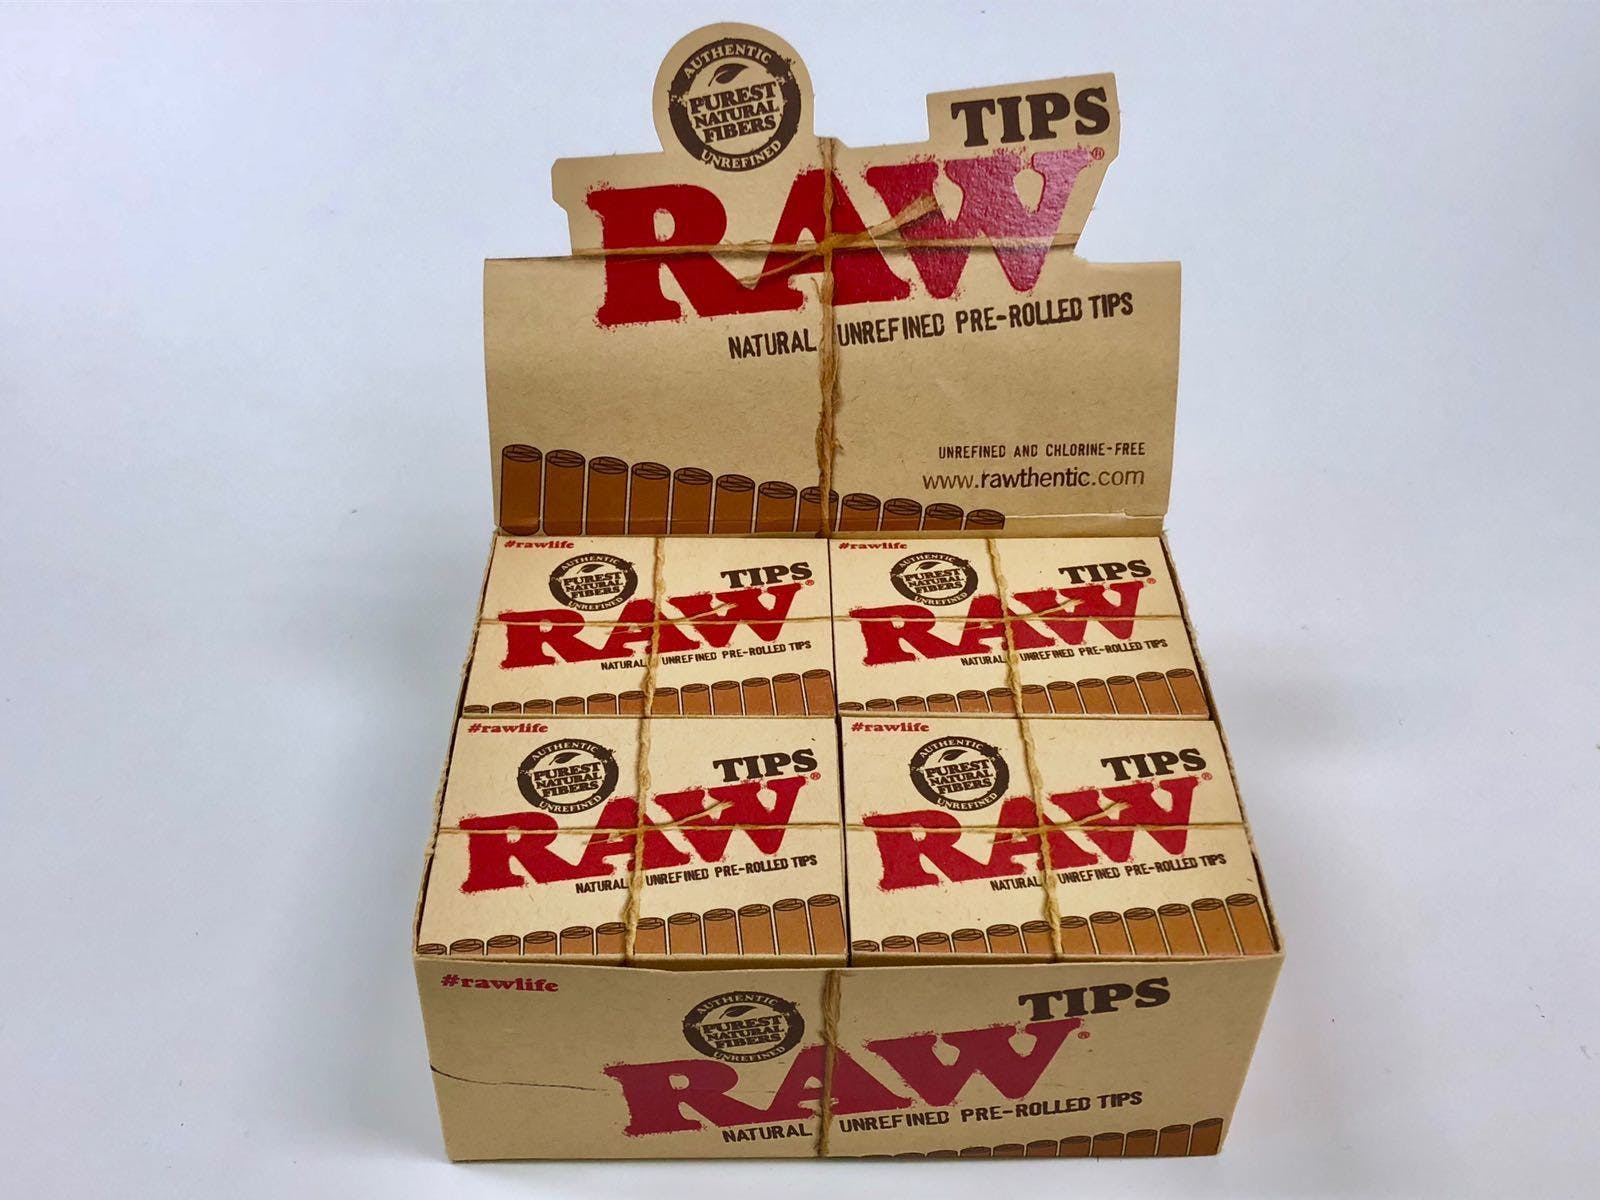 gear-raw-natural-unrefined-pre-rolled-tips